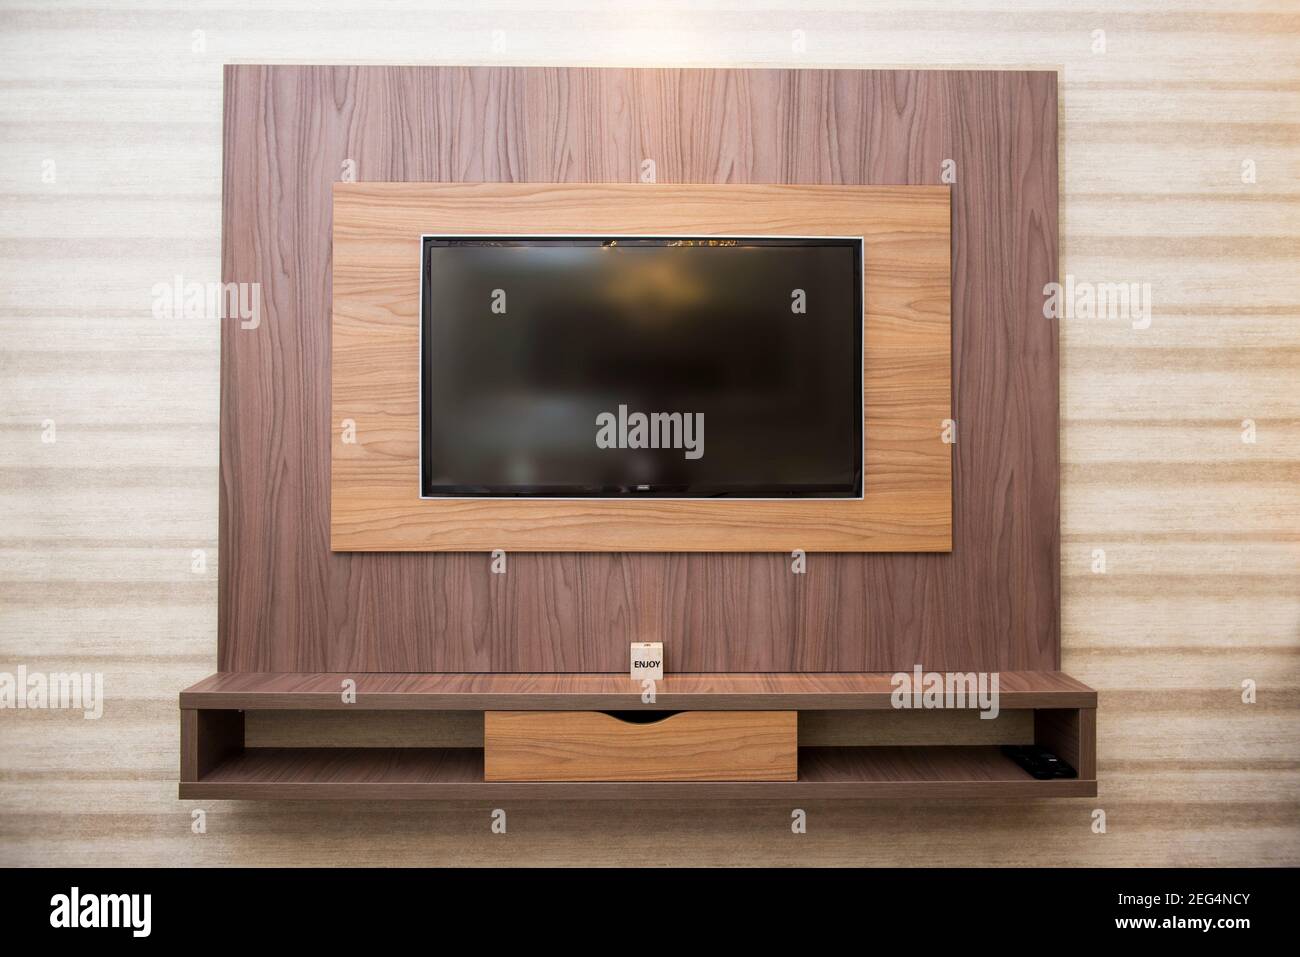 Smart TV in a wooden wall in a cozy apartment Stock Photo